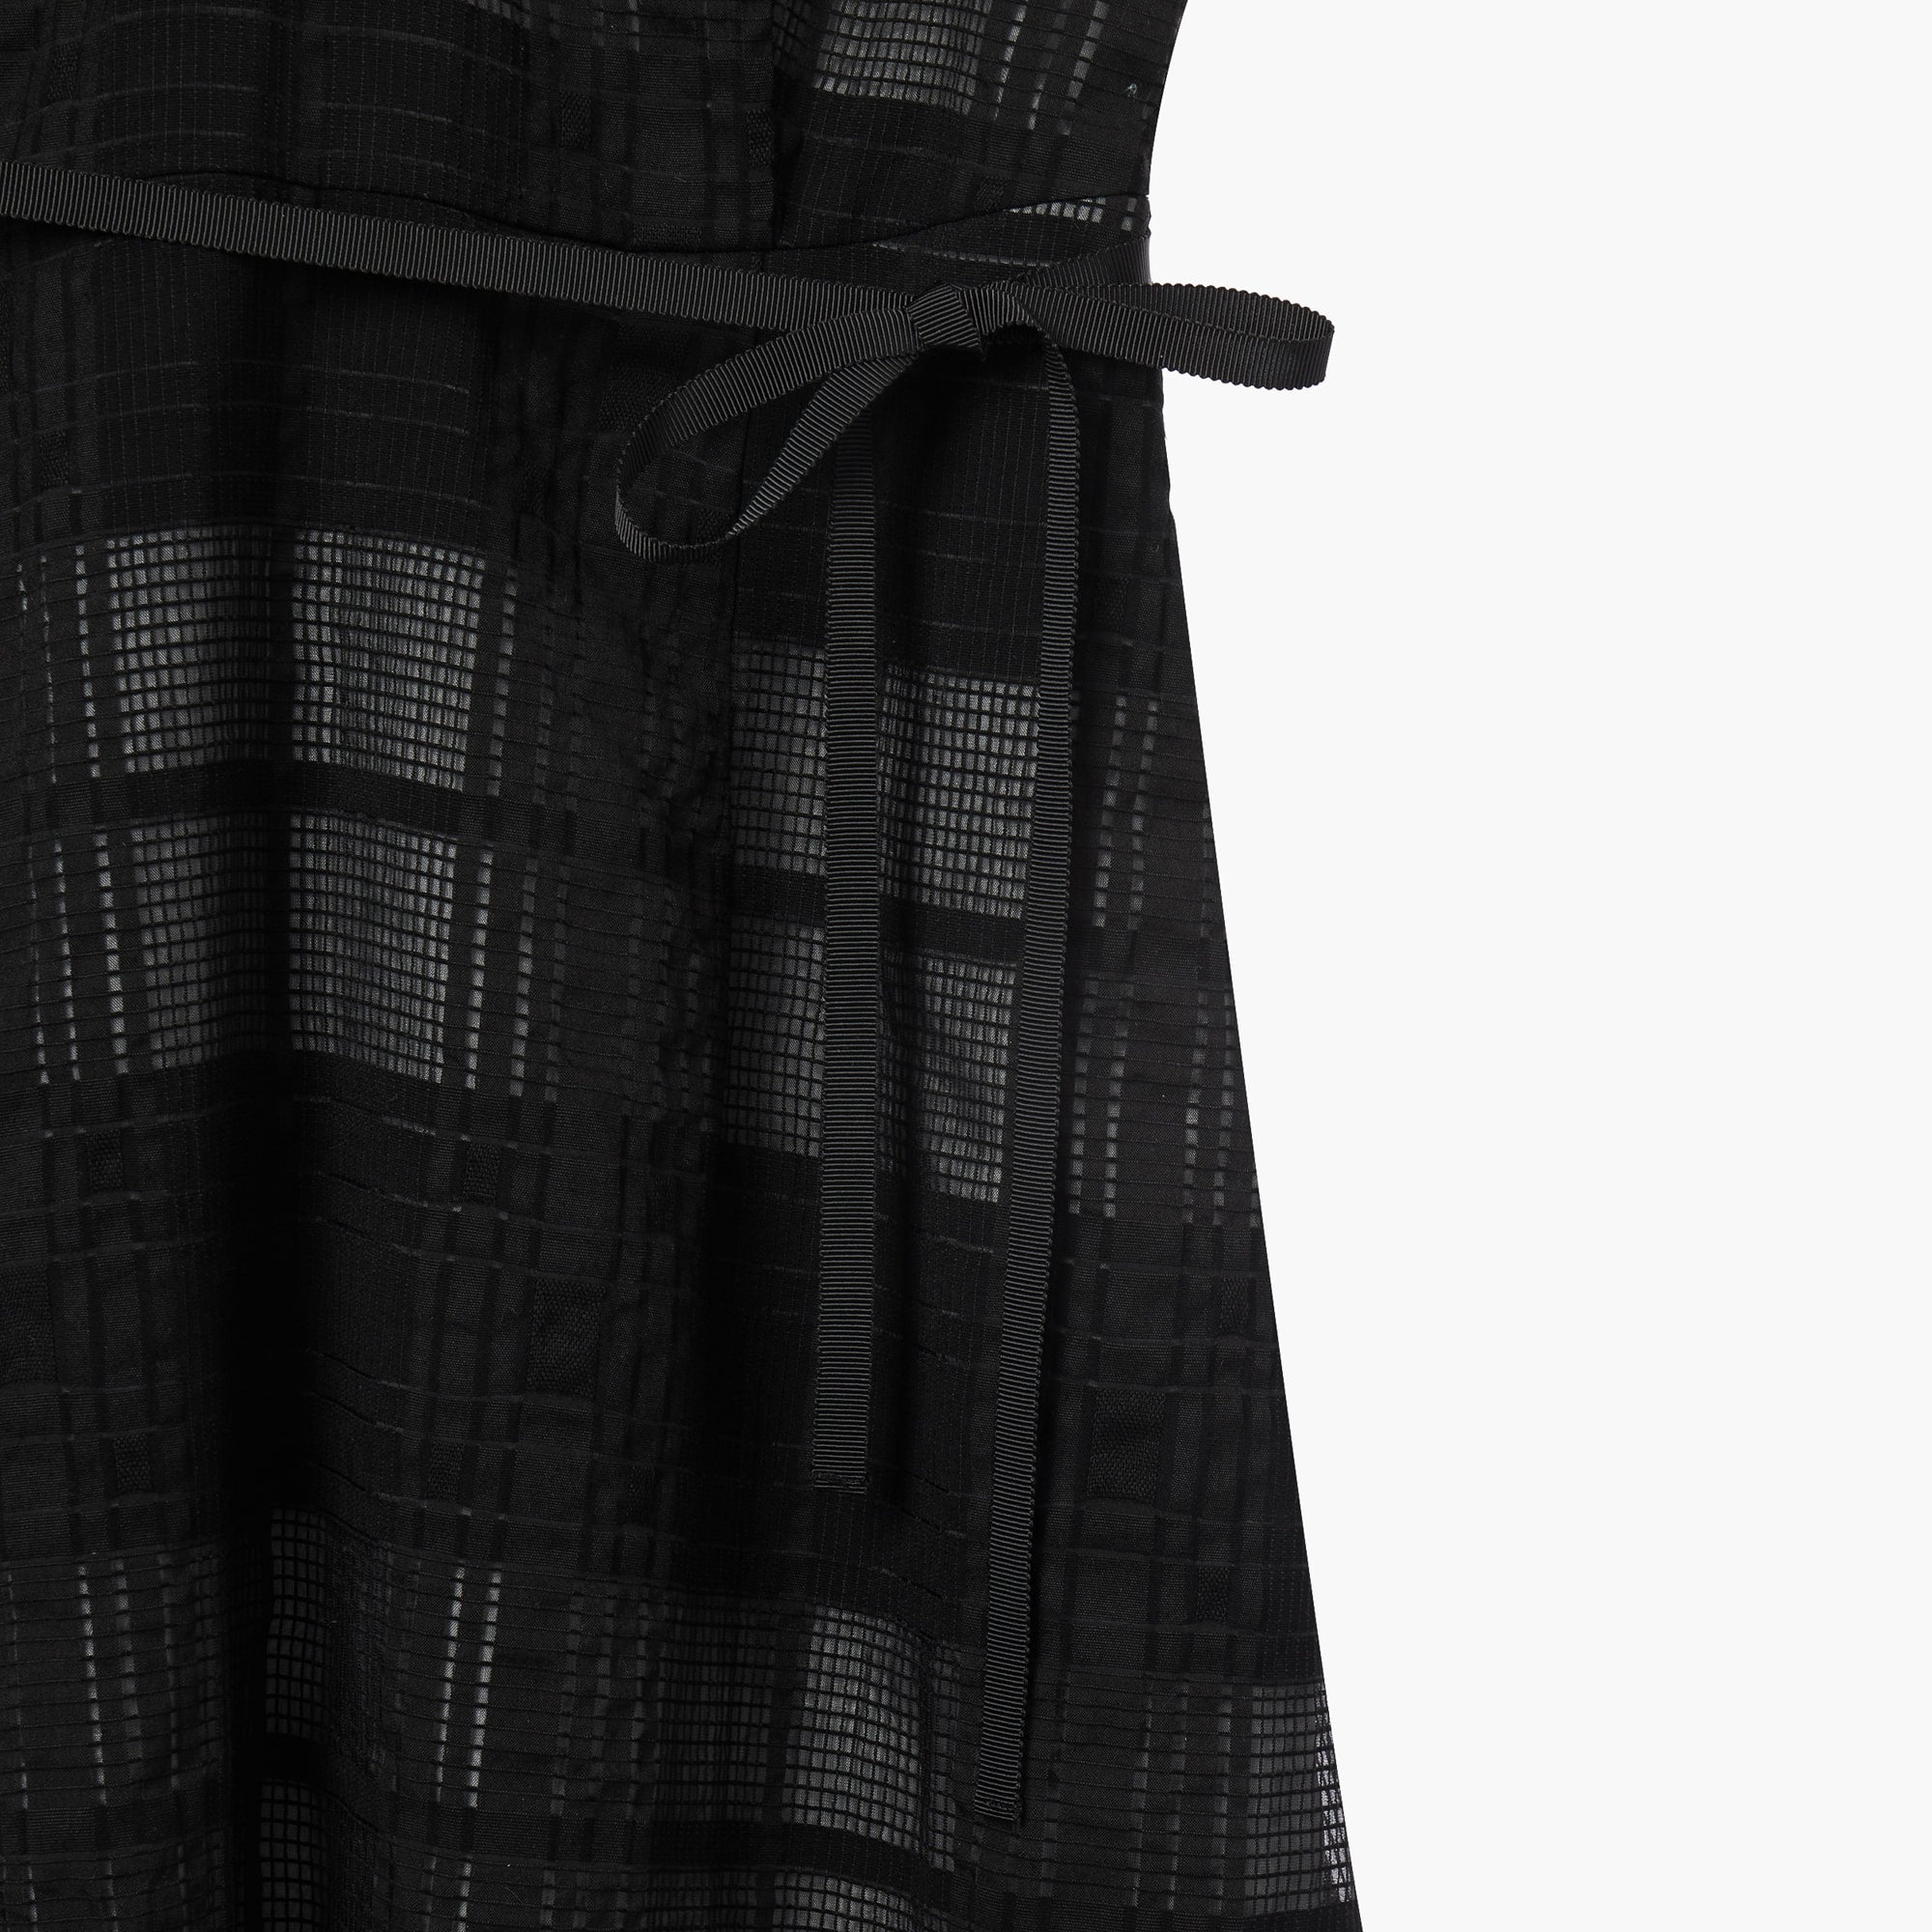 CHECKERED LACE SLEEVELESS DRESS - LINGER GALLERY